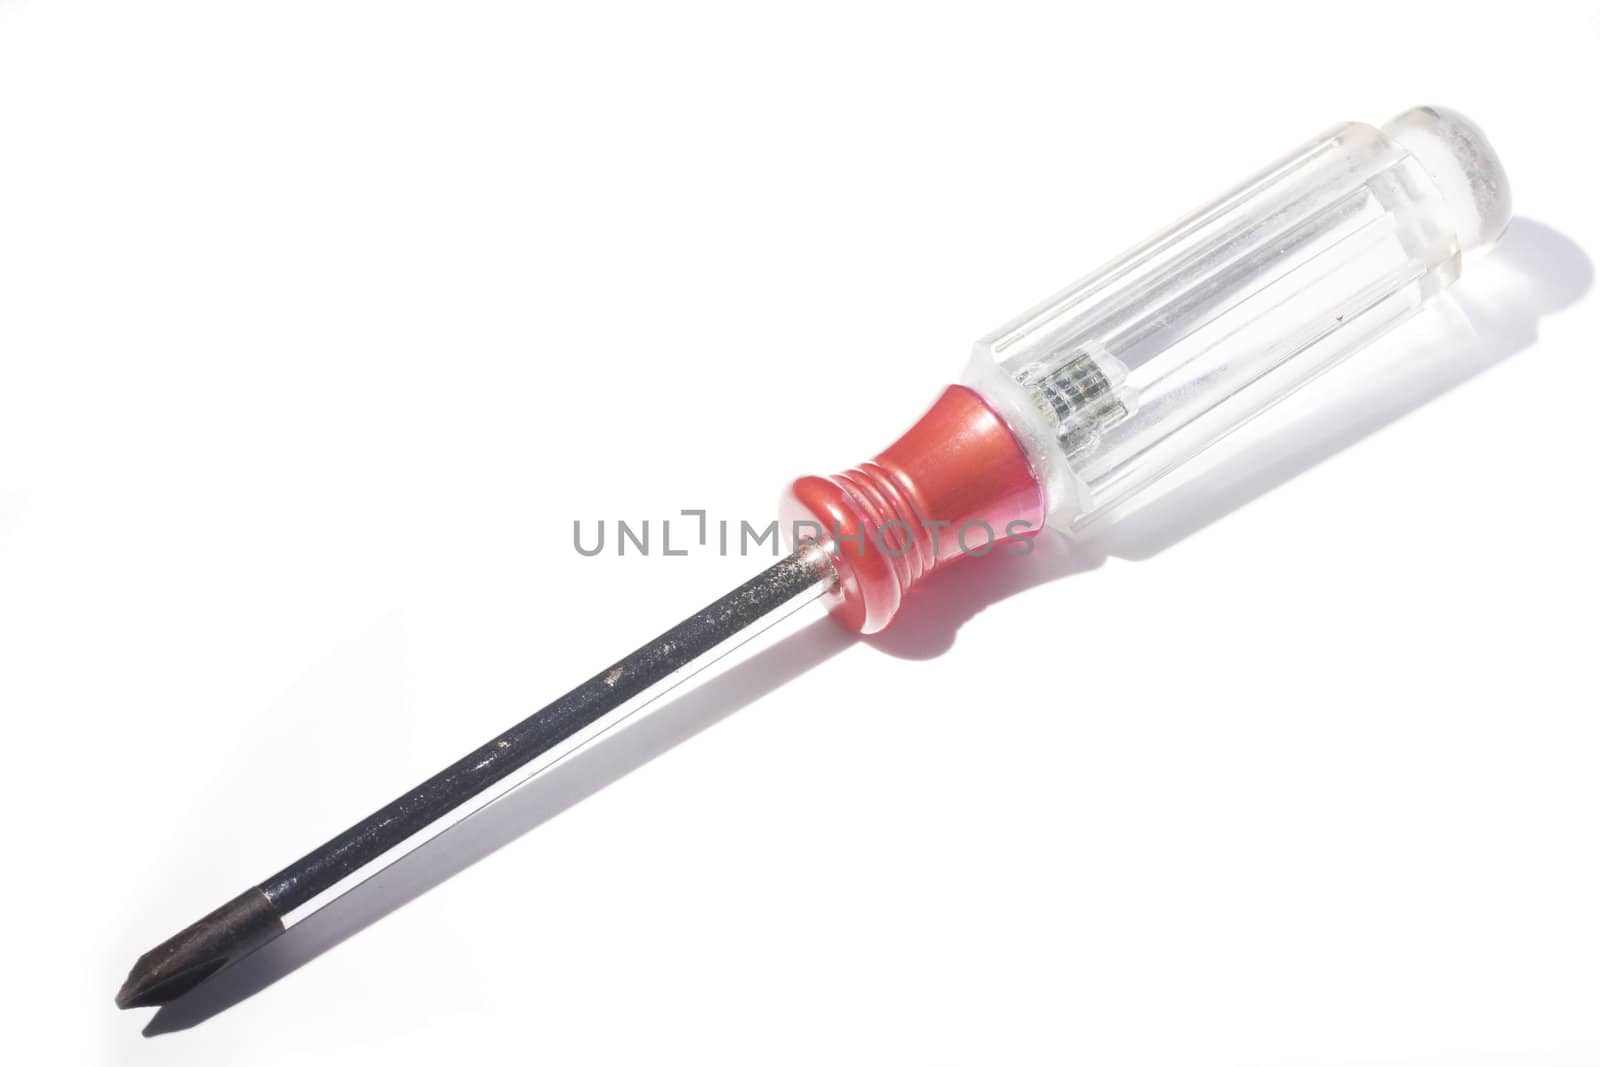 it is a Screw Driver 
on white background